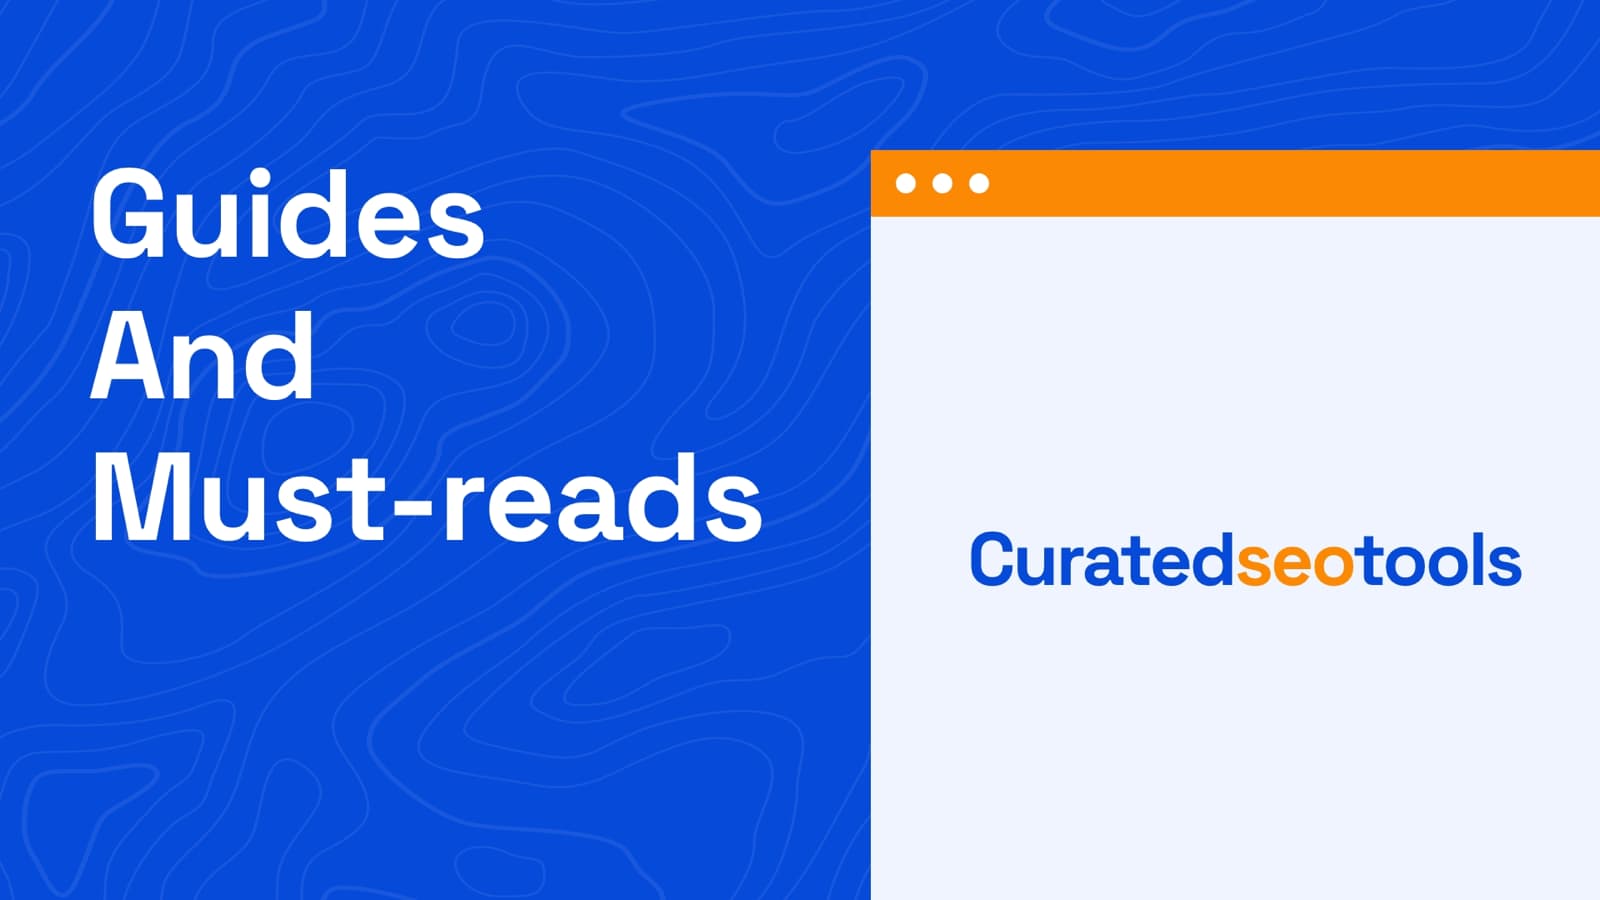 The cover image about the content title which is "Guides and Must-reads" and a browser shaped graphic element